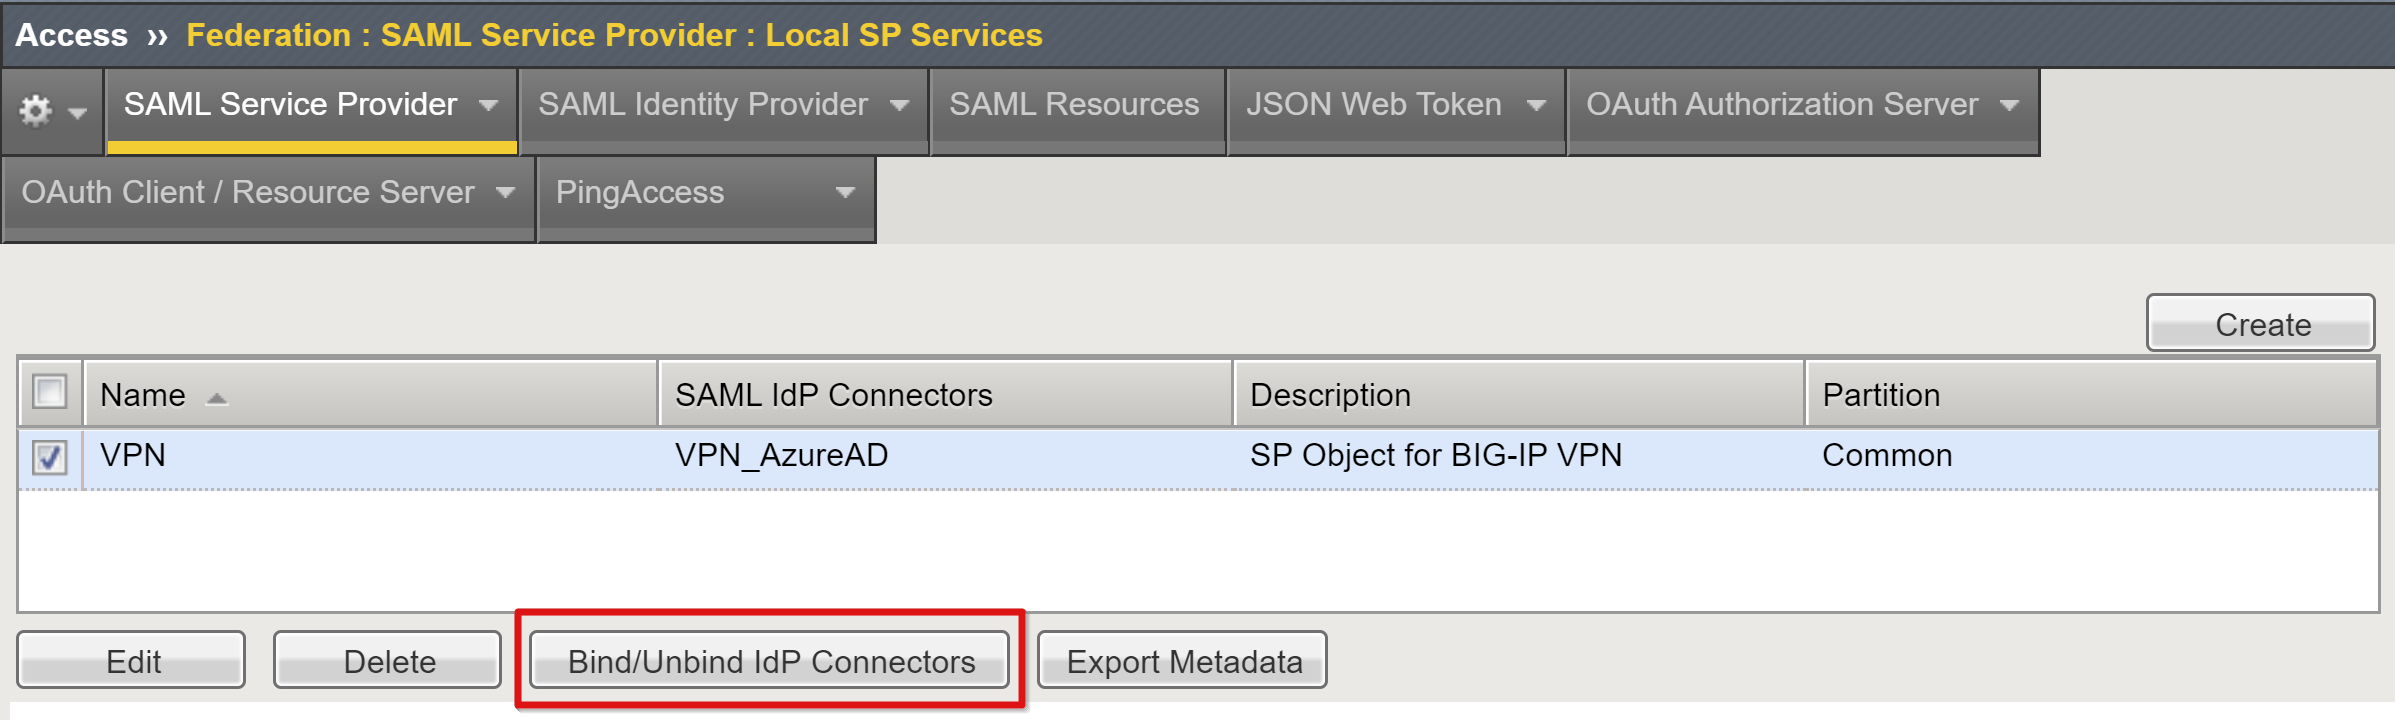 Screenshot of the Bind Unbind IDP Connections option on the Local SP Services page.